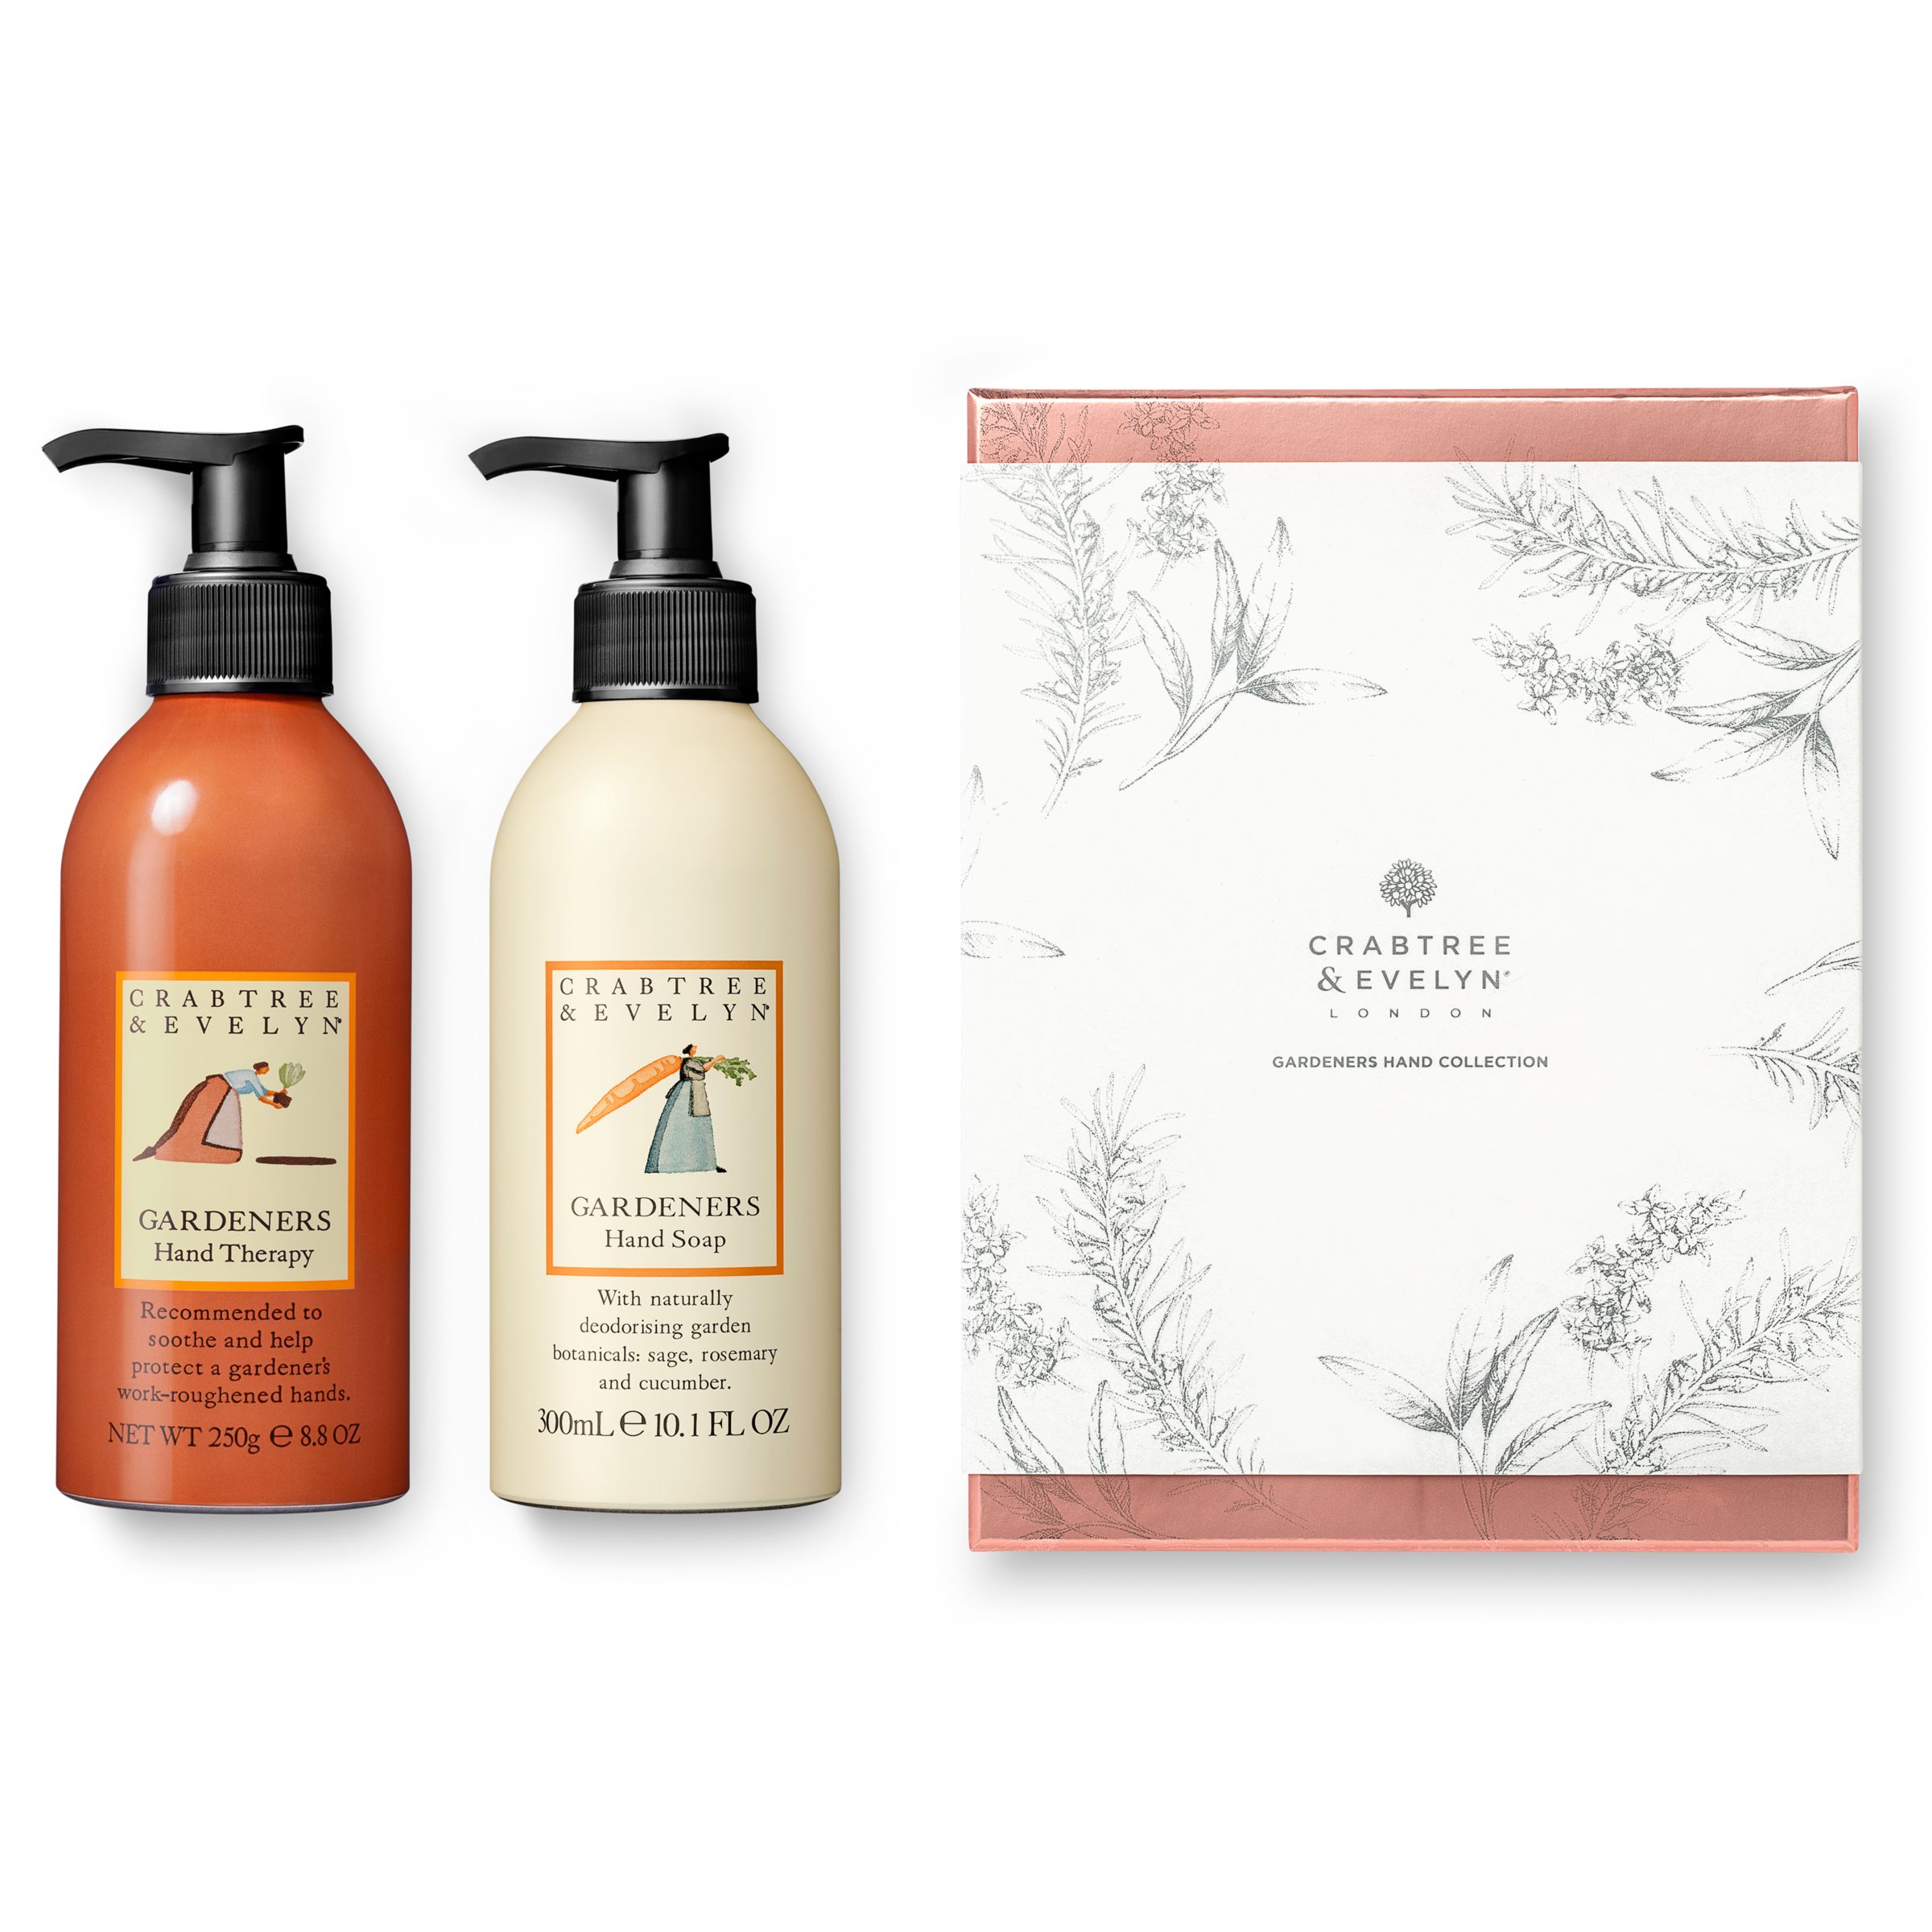 Crabtree Evelyn Gardeners Hand Collection At John Lewis Partners